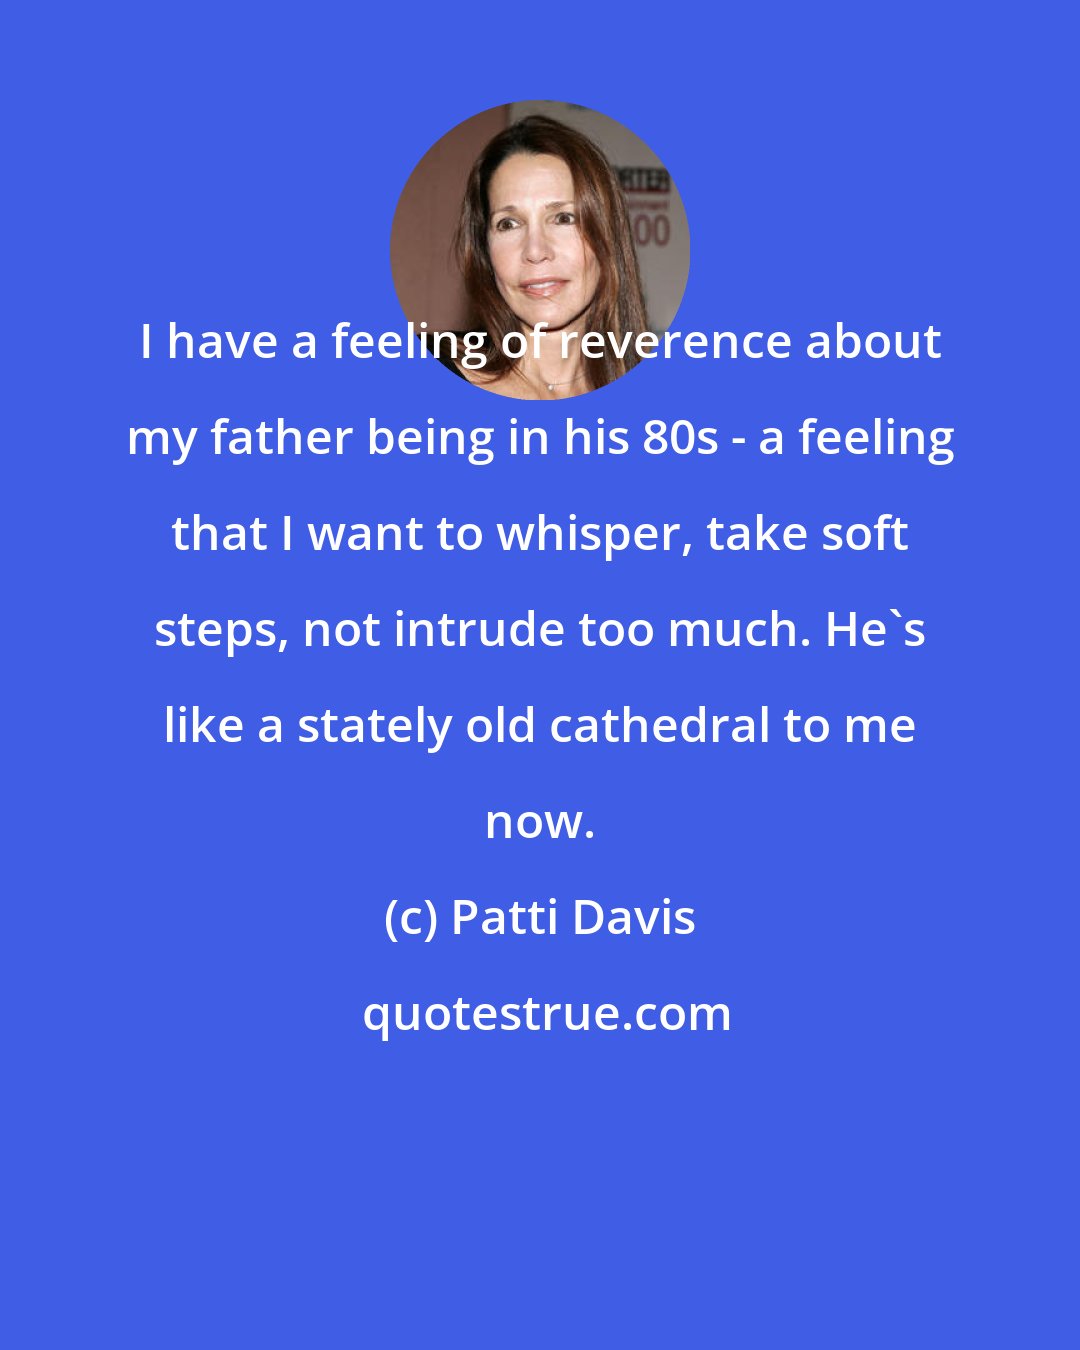 Patti Davis: I have a feeling of reverence about my father being in his 80s - a feeling that I want to whisper, take soft steps, not intrude too much. He's like a stately old cathedral to me now.